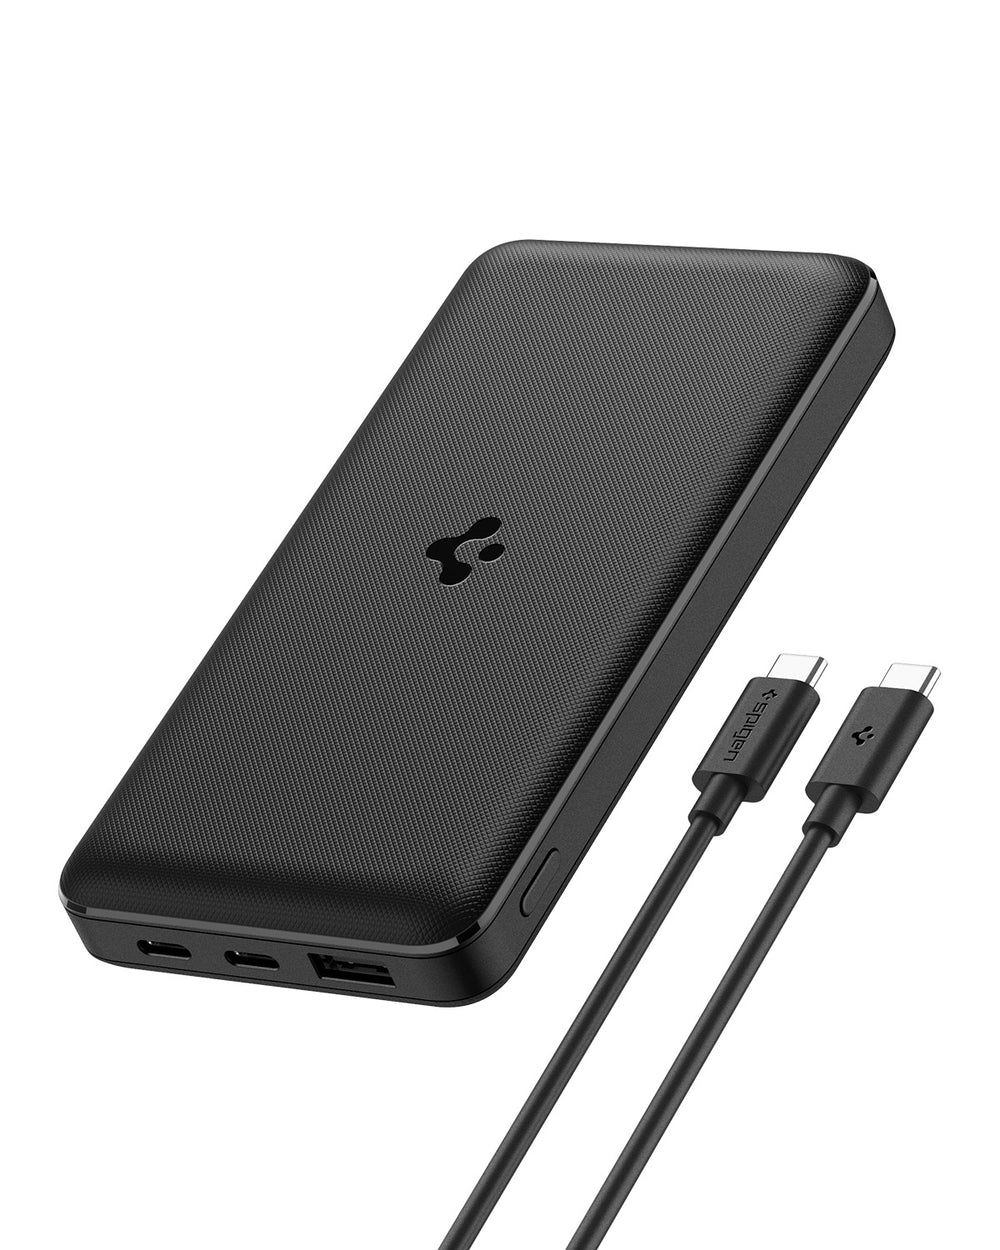 Iconic Power Bank (20,000mAh, 22.5W) with PD3.0, QC3.0